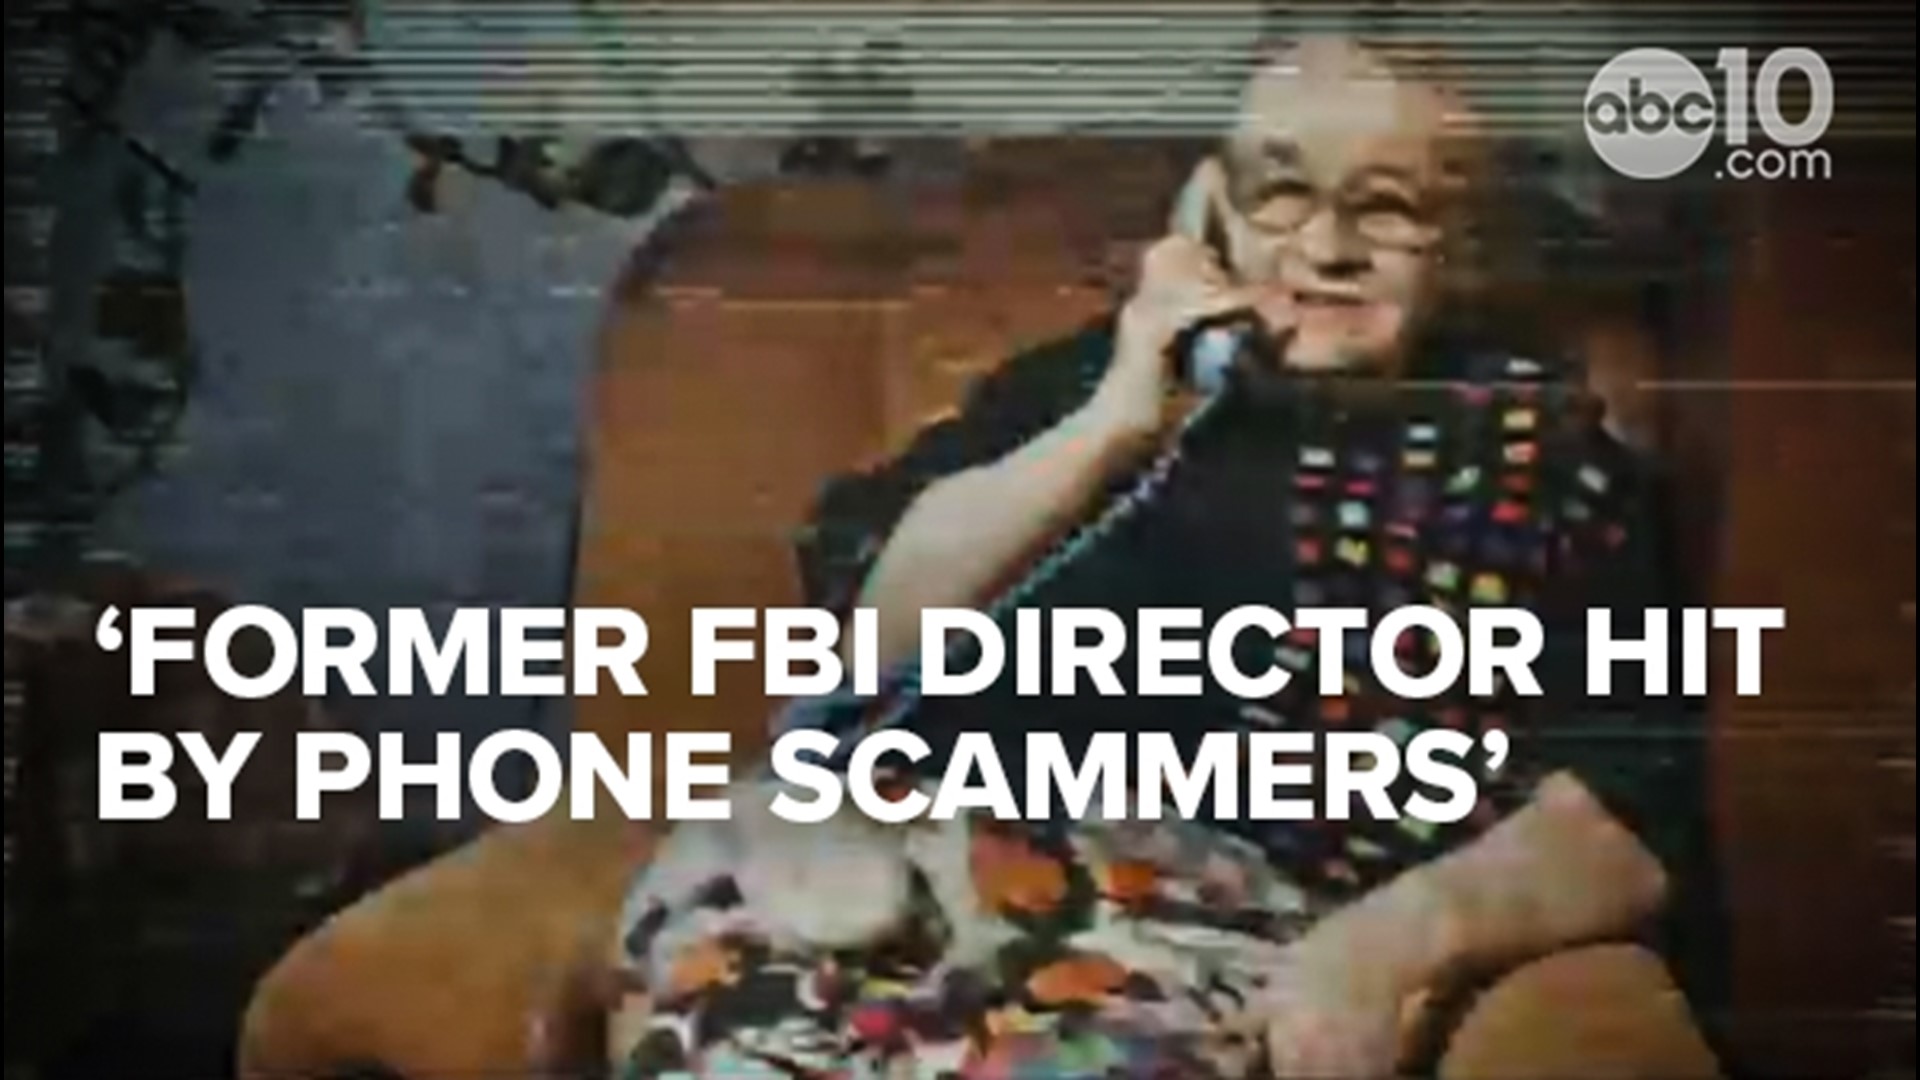 In our ongoing series about robocallers and phone scammers, our Chris Thomas shares a story about the former FBI director opening up about his attempted scamming.